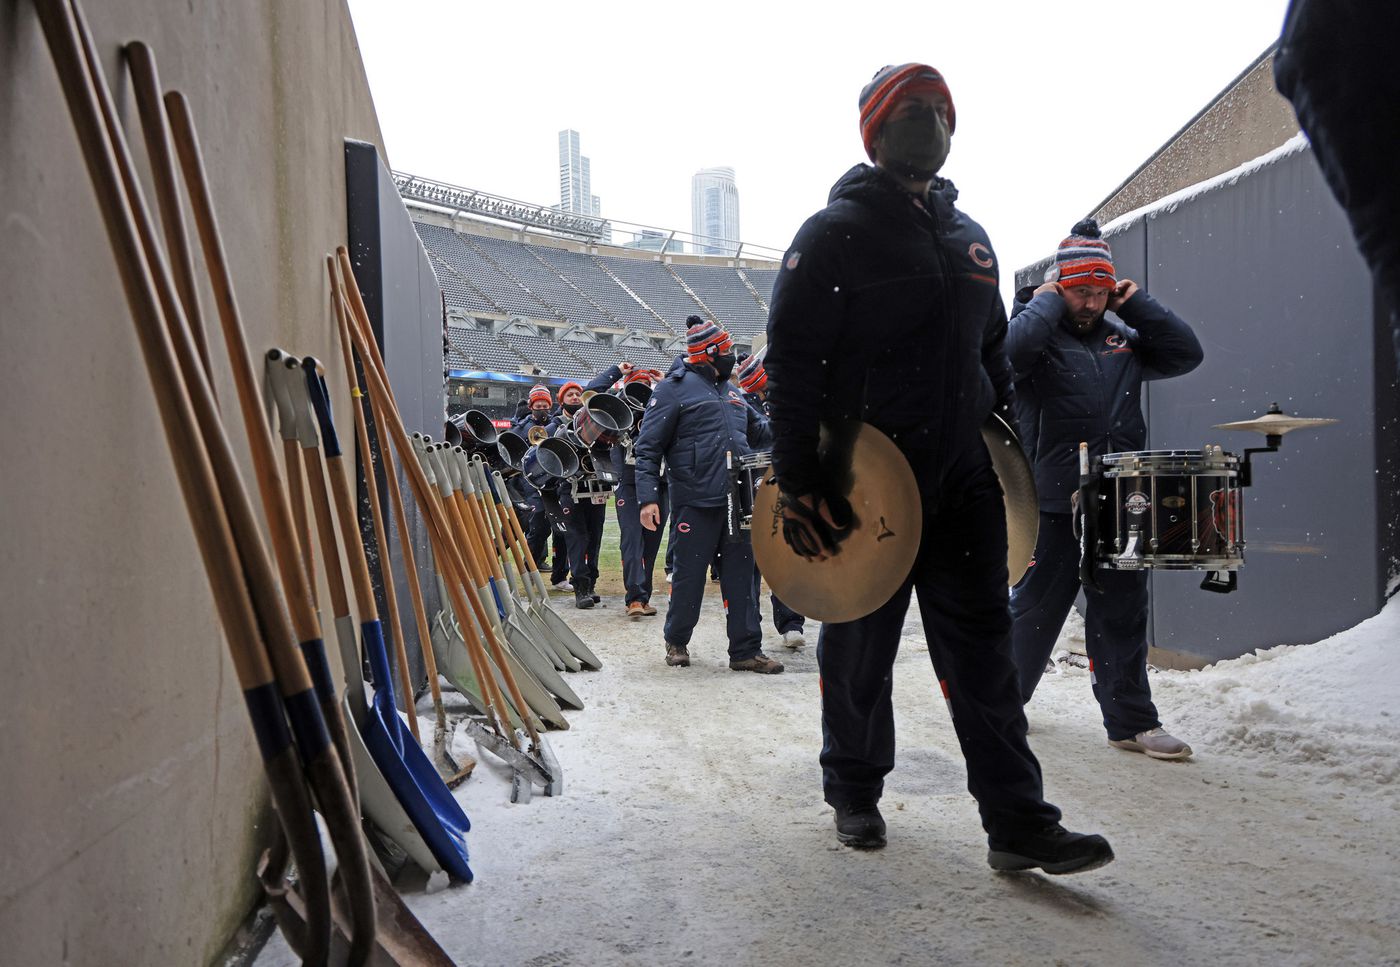 The Bears band prepares for a snowy game against the Giants on Jan. 2, 2022, at Soldier Field.